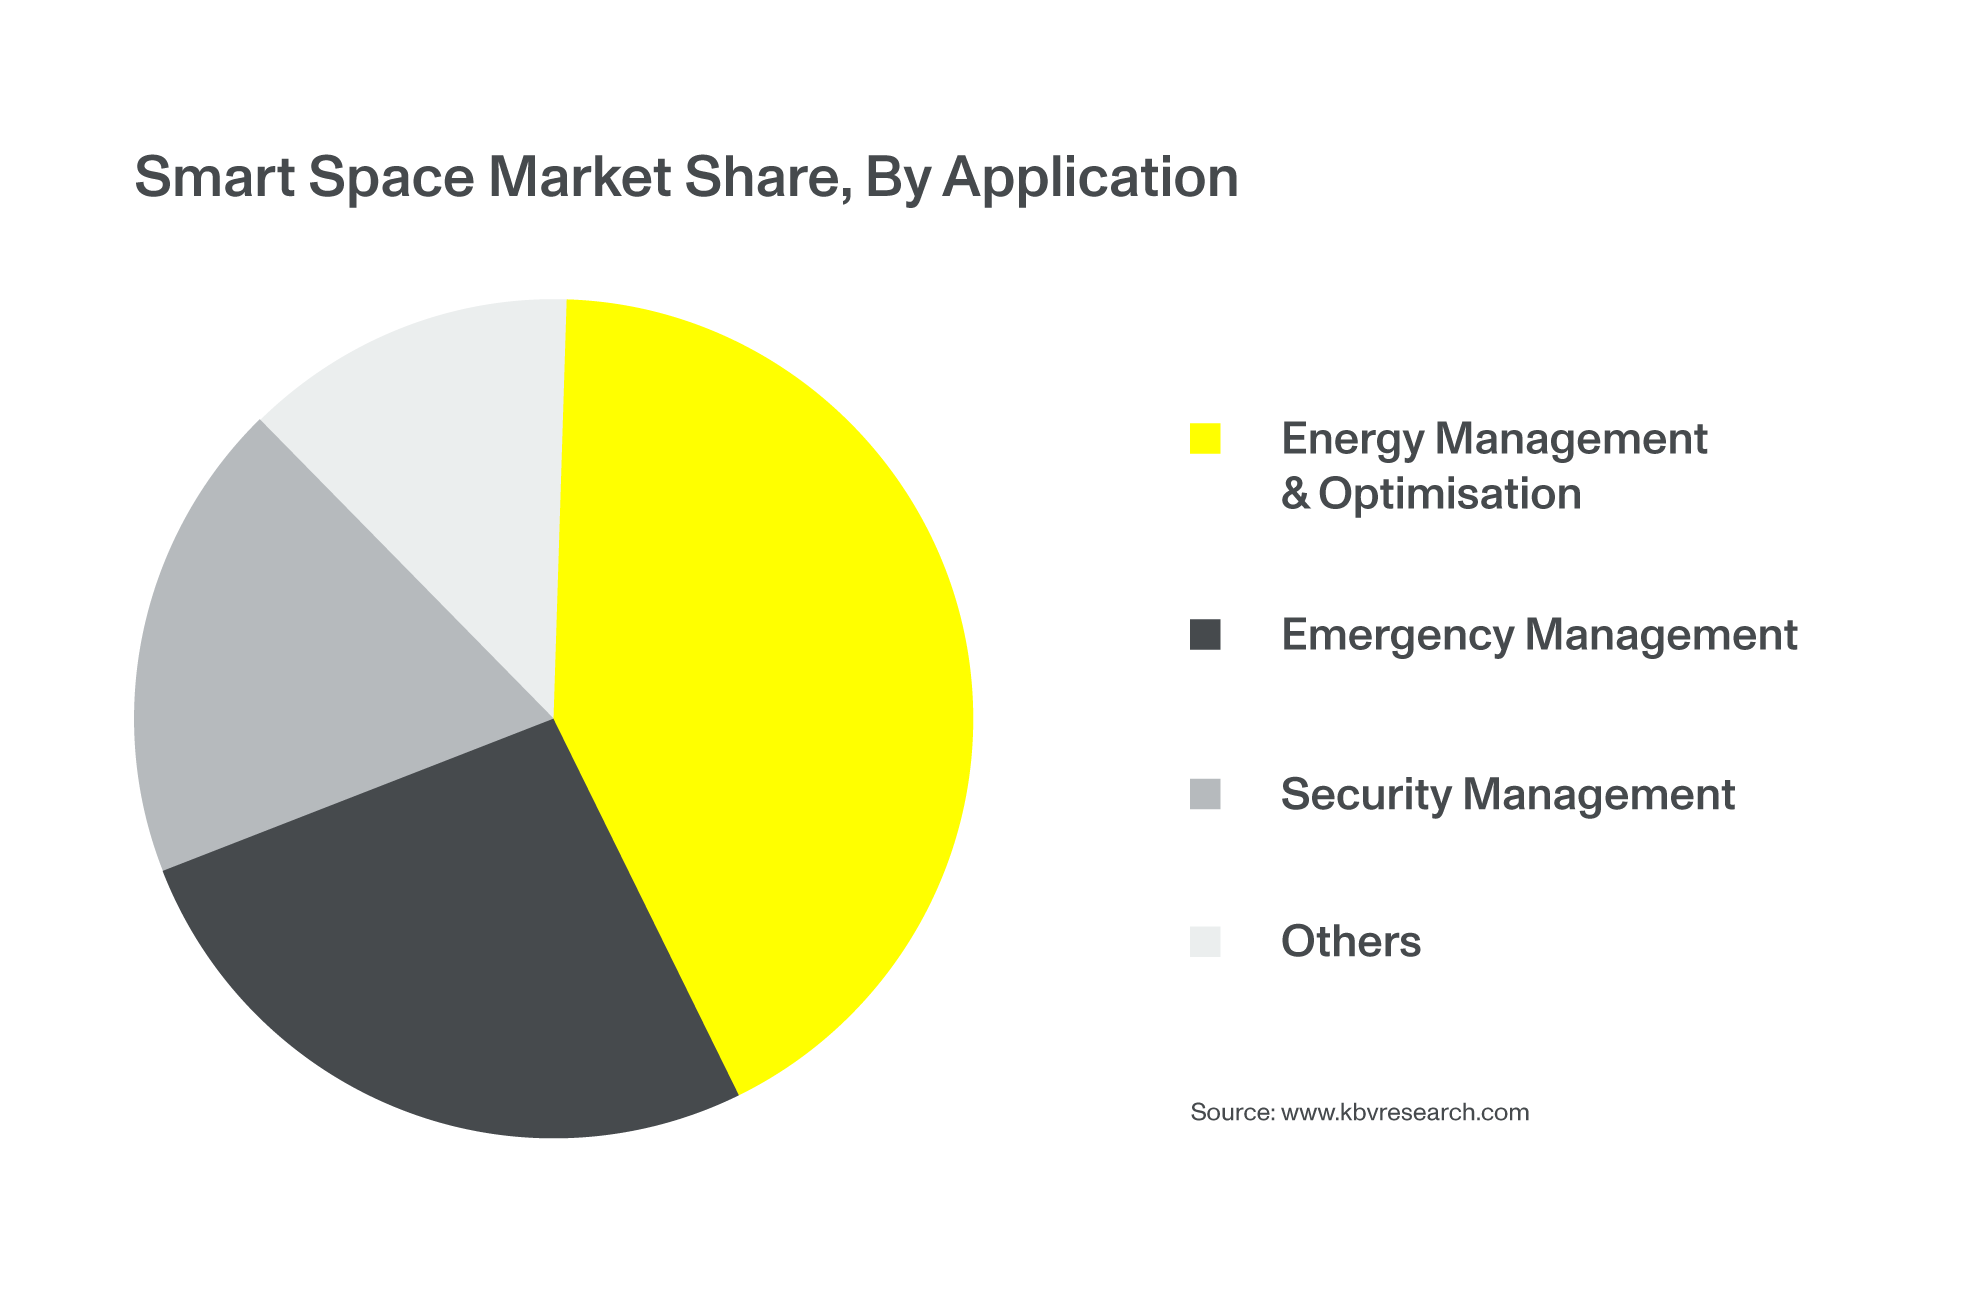 Smart Space Market Share, By Application